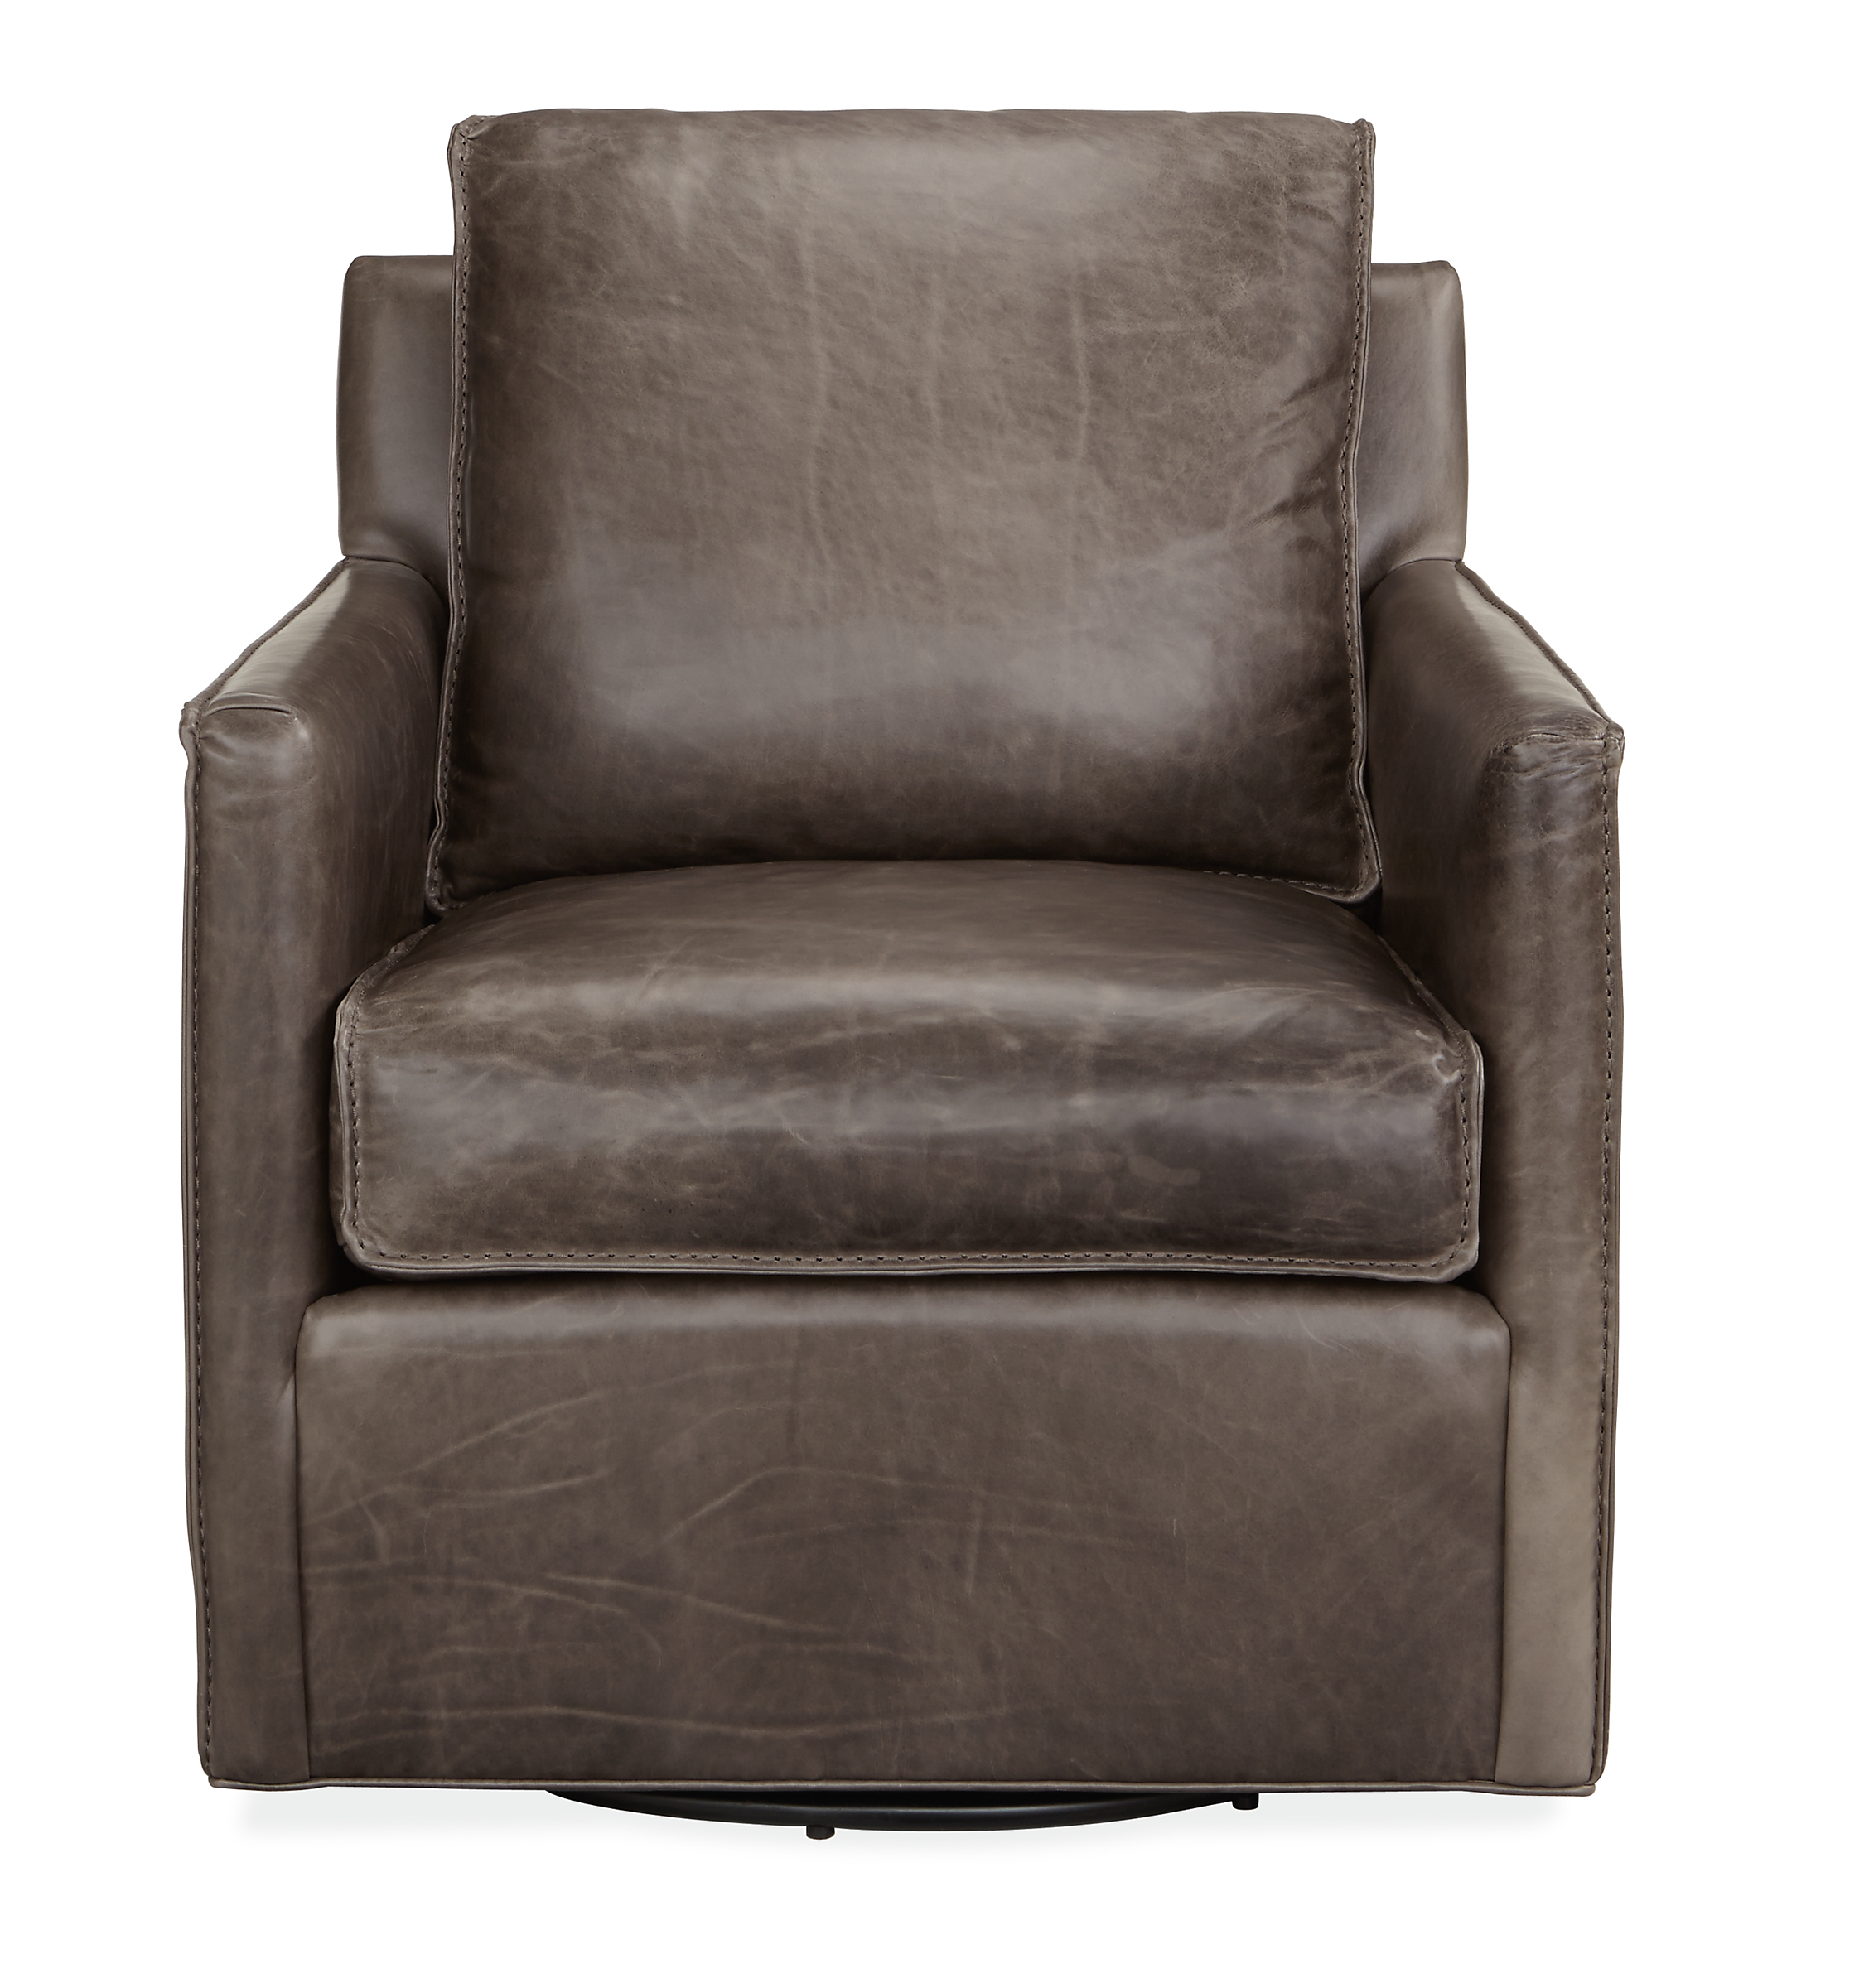 Front view of Bram Swivel Chair in Vento Smoke.